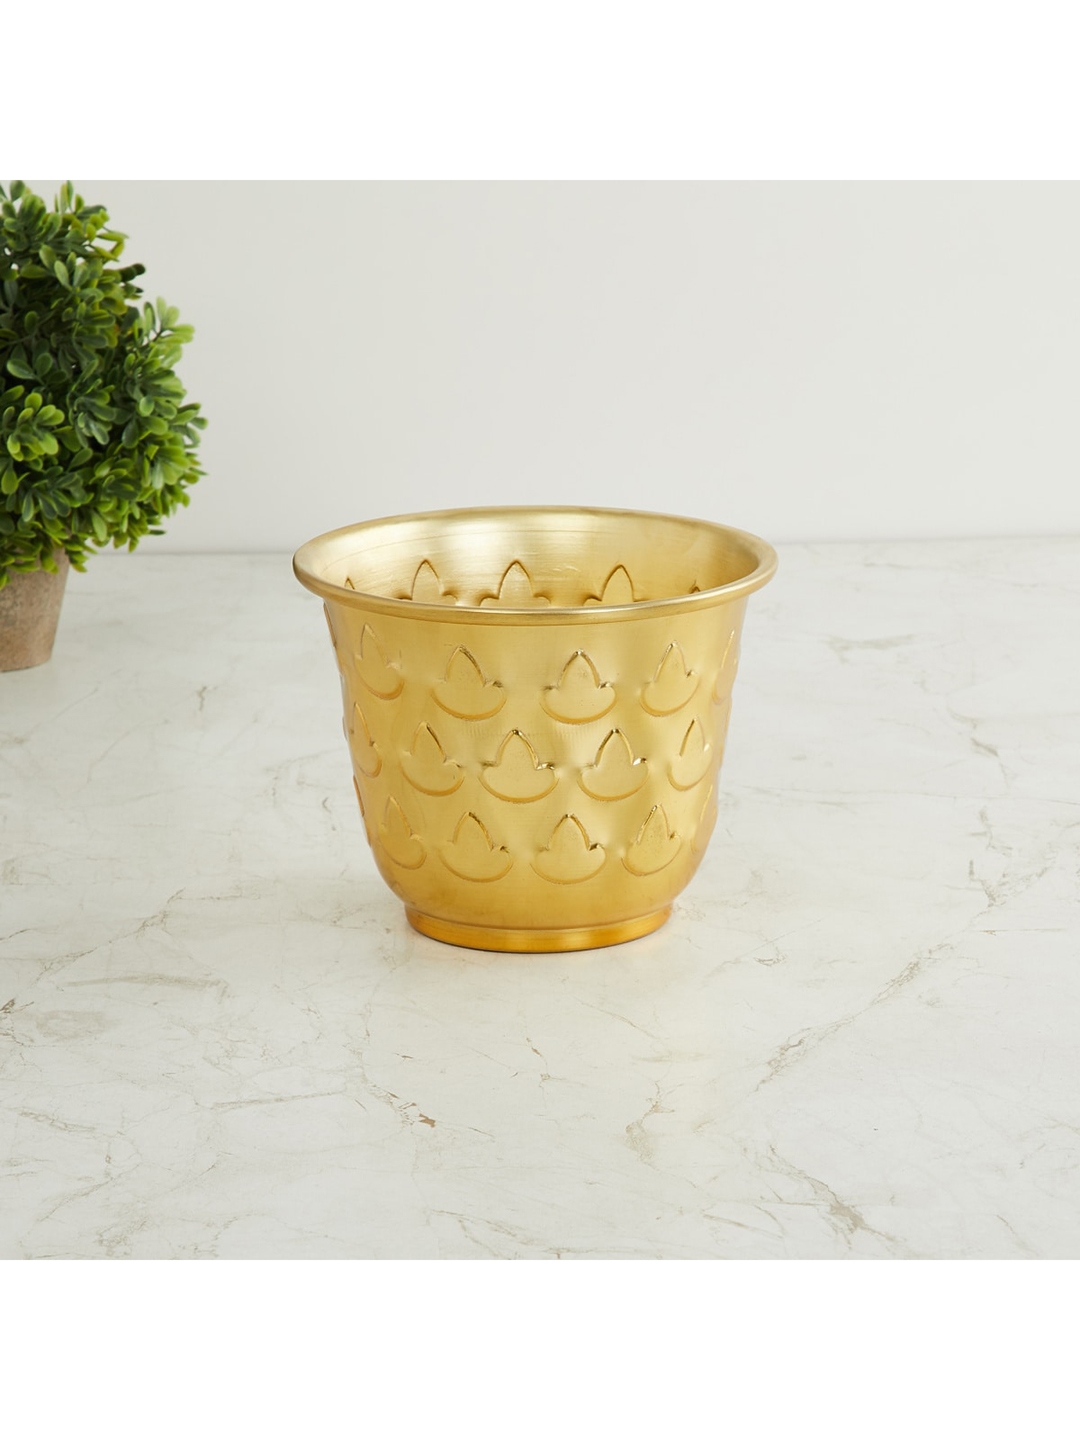 Home Centre Gold-Toned Textured Fiesta Planter